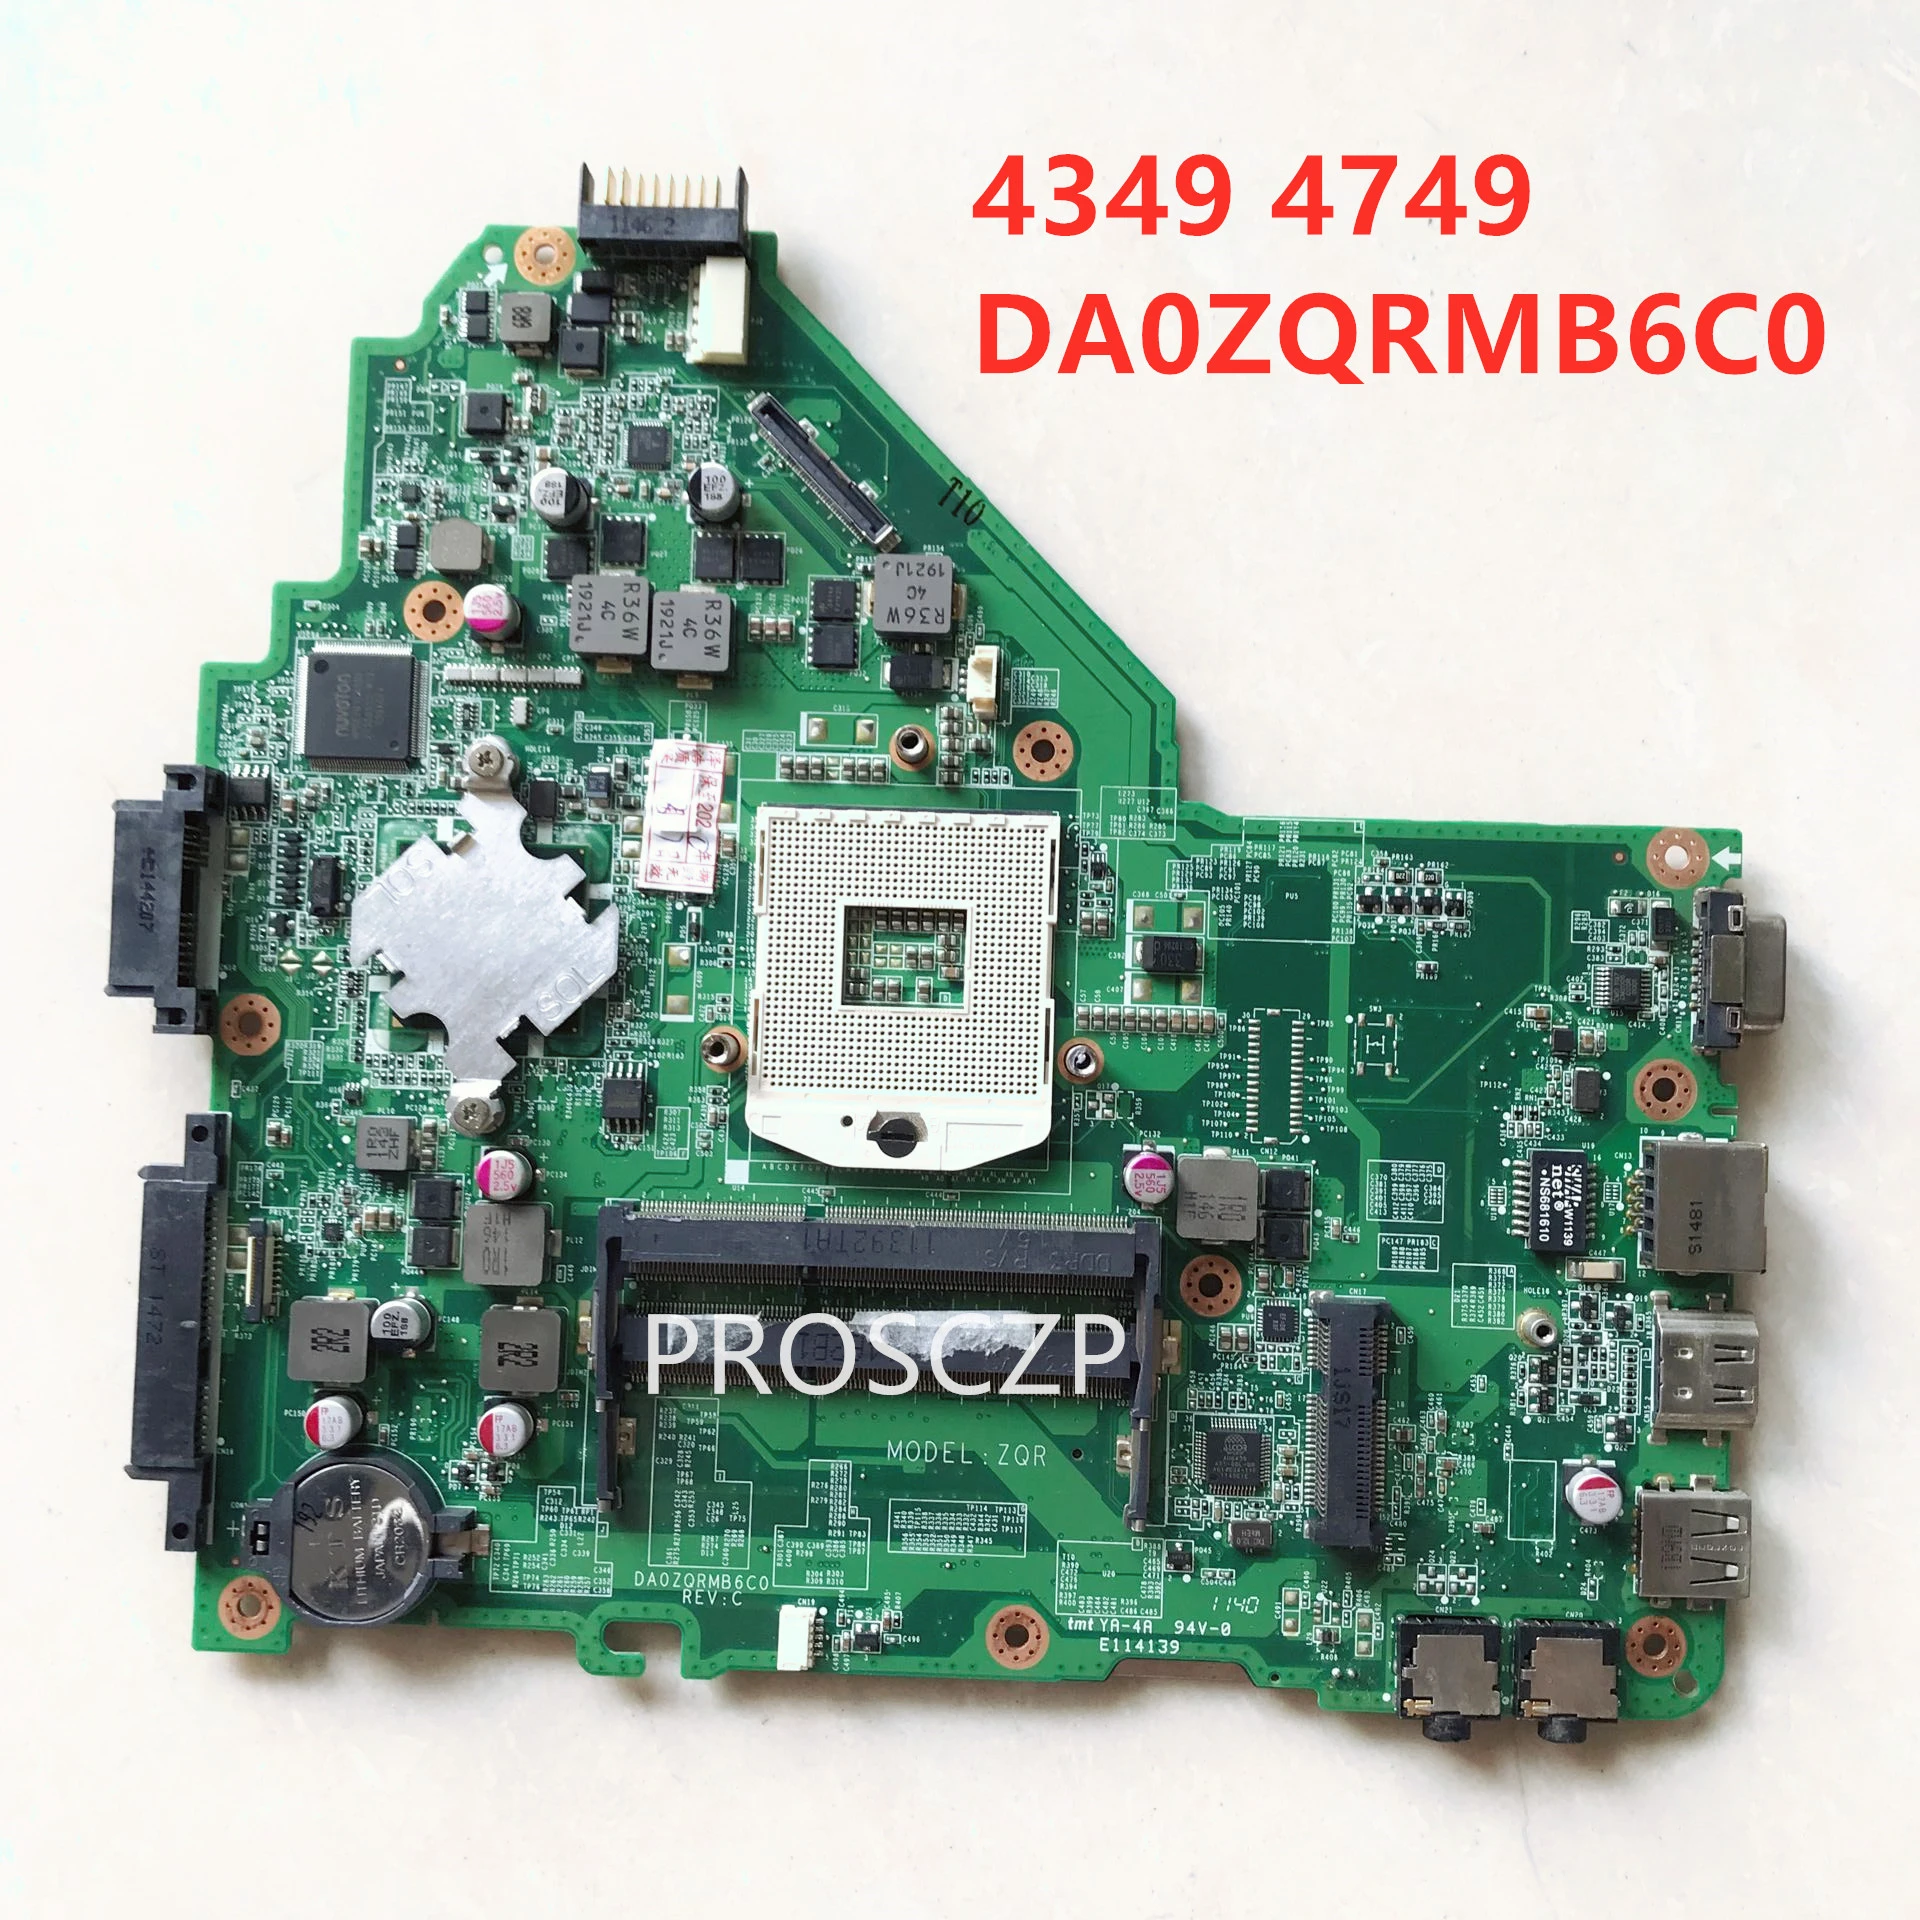 Free Shipping Mainboard For ACER Aspire 4349 4749 Laptop Motherboard DA0ZQRMB6C0 HM65 MBRR406001 100% Full Tested Working Well laptop motherboards